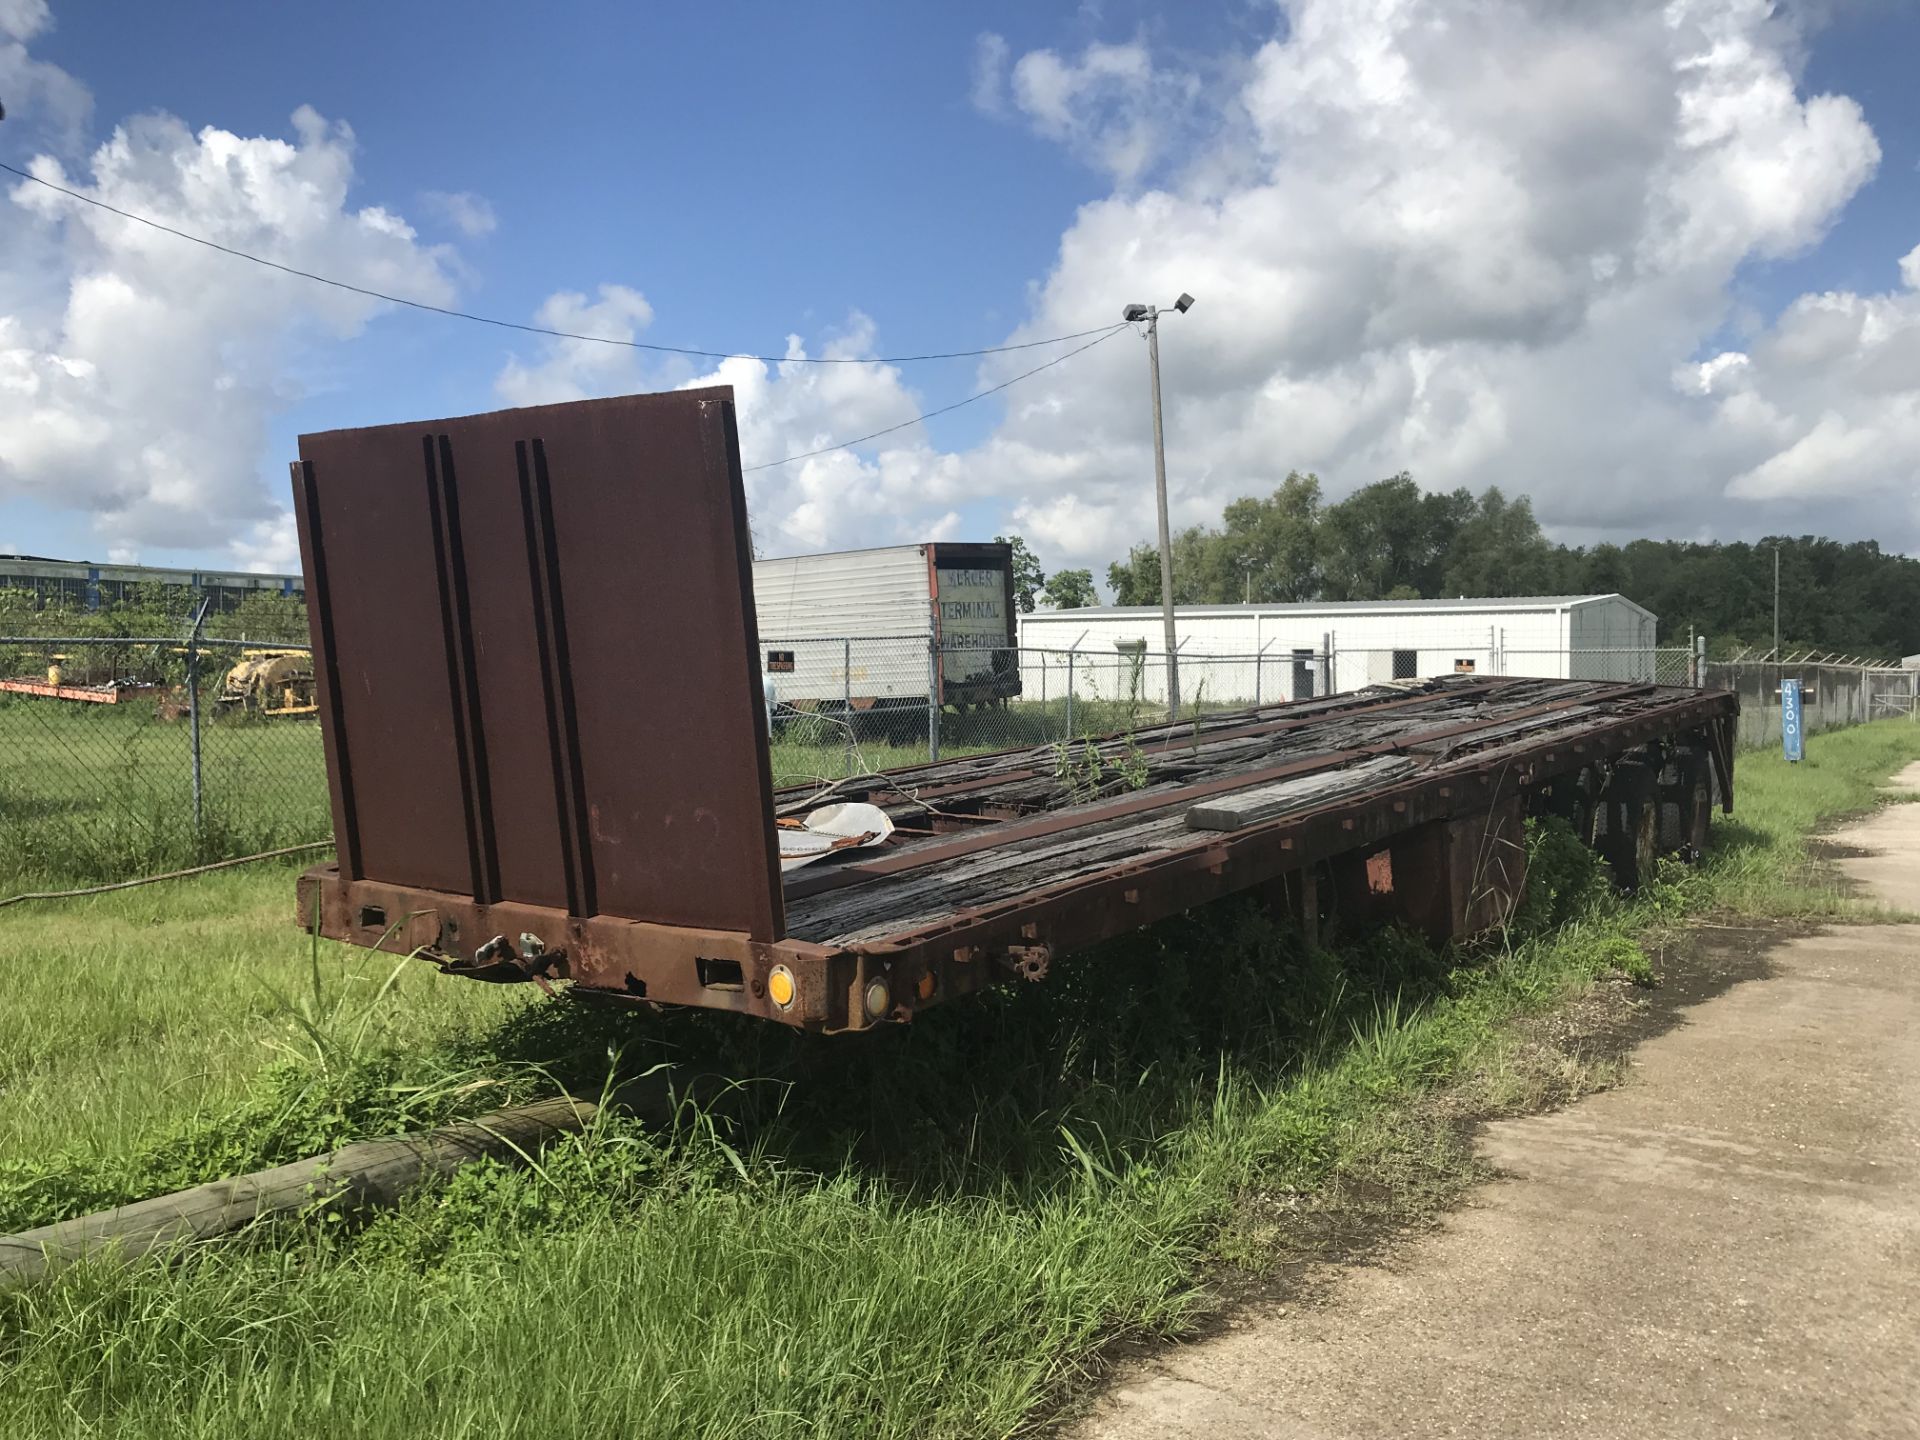 LOW PROFILE TRAILER - APPROXIMATELY 48' - #0257385 (LOCATED IN NEW ORLEANS, LA) - Image 6 of 7